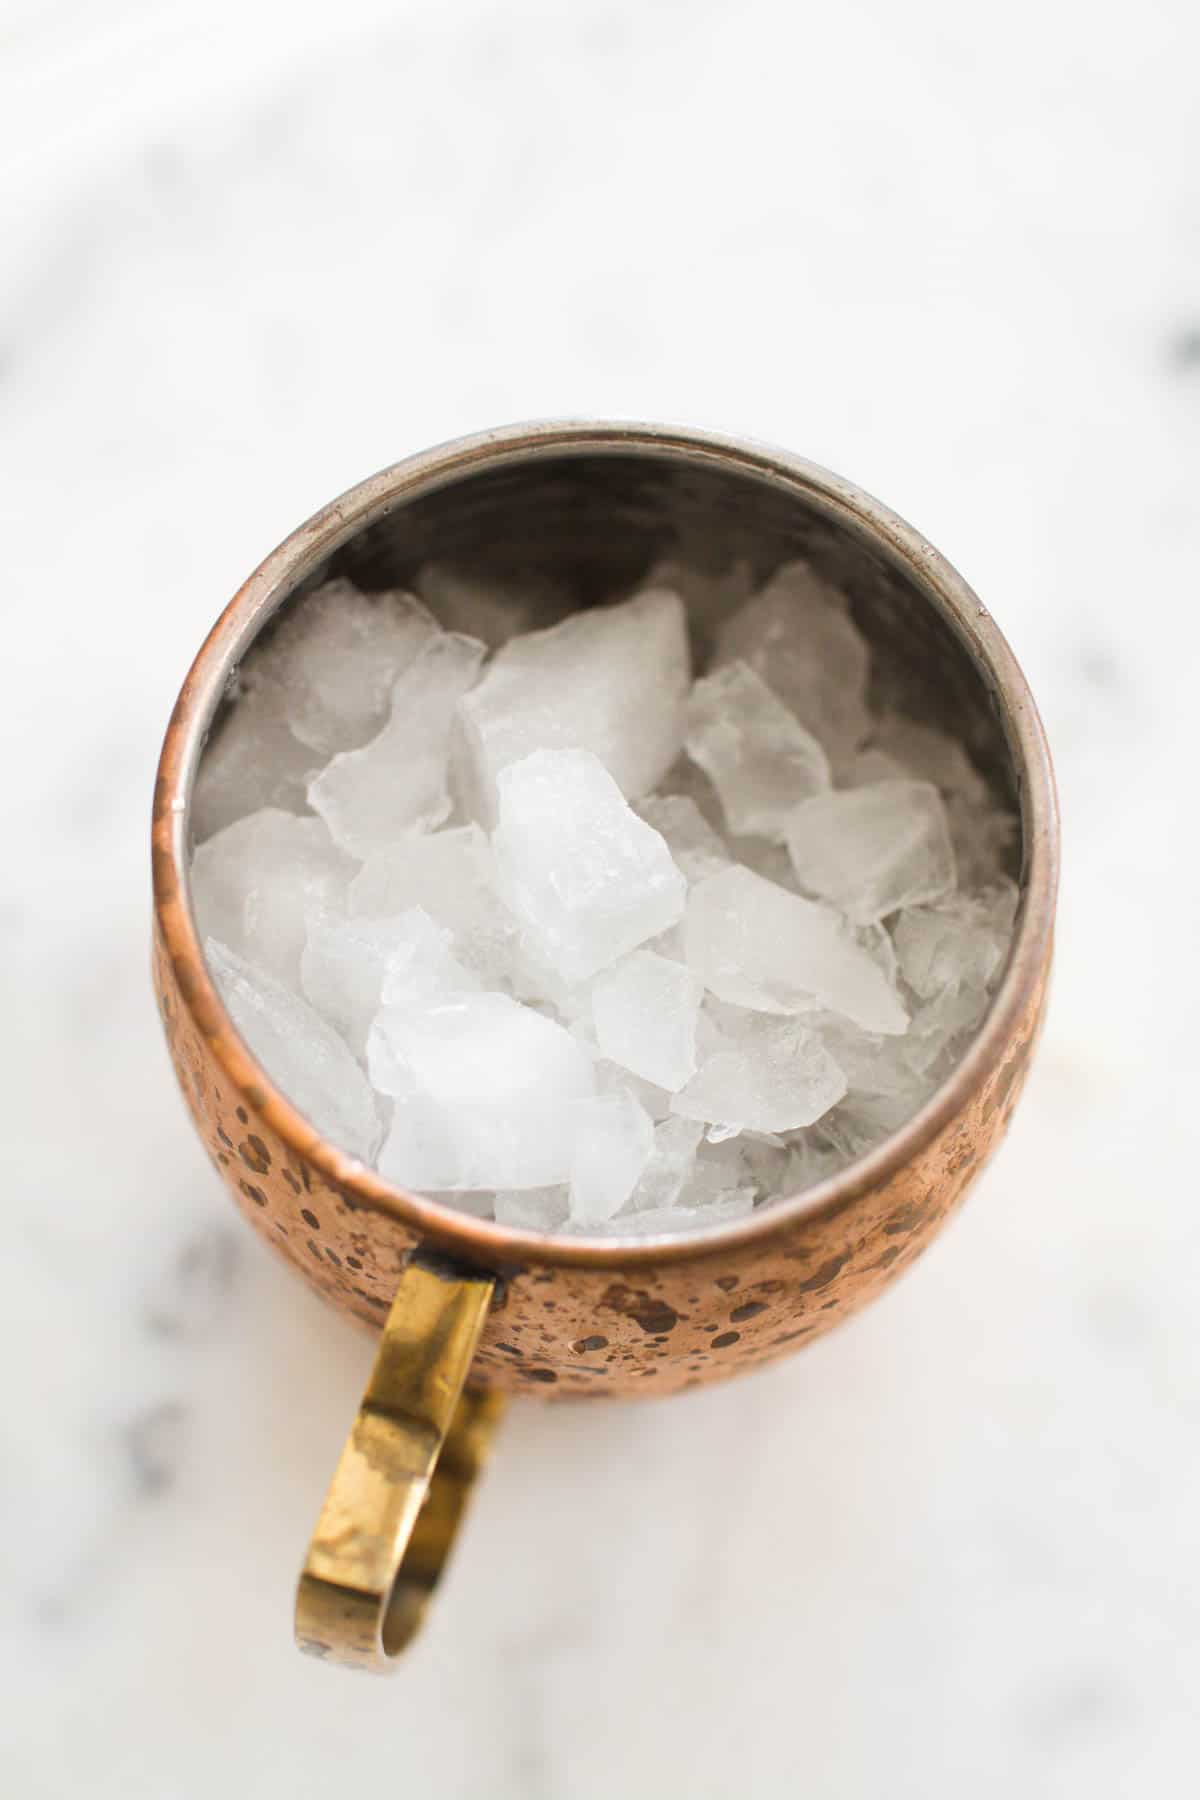 Overhead shot of a copper Mule mug with ice.